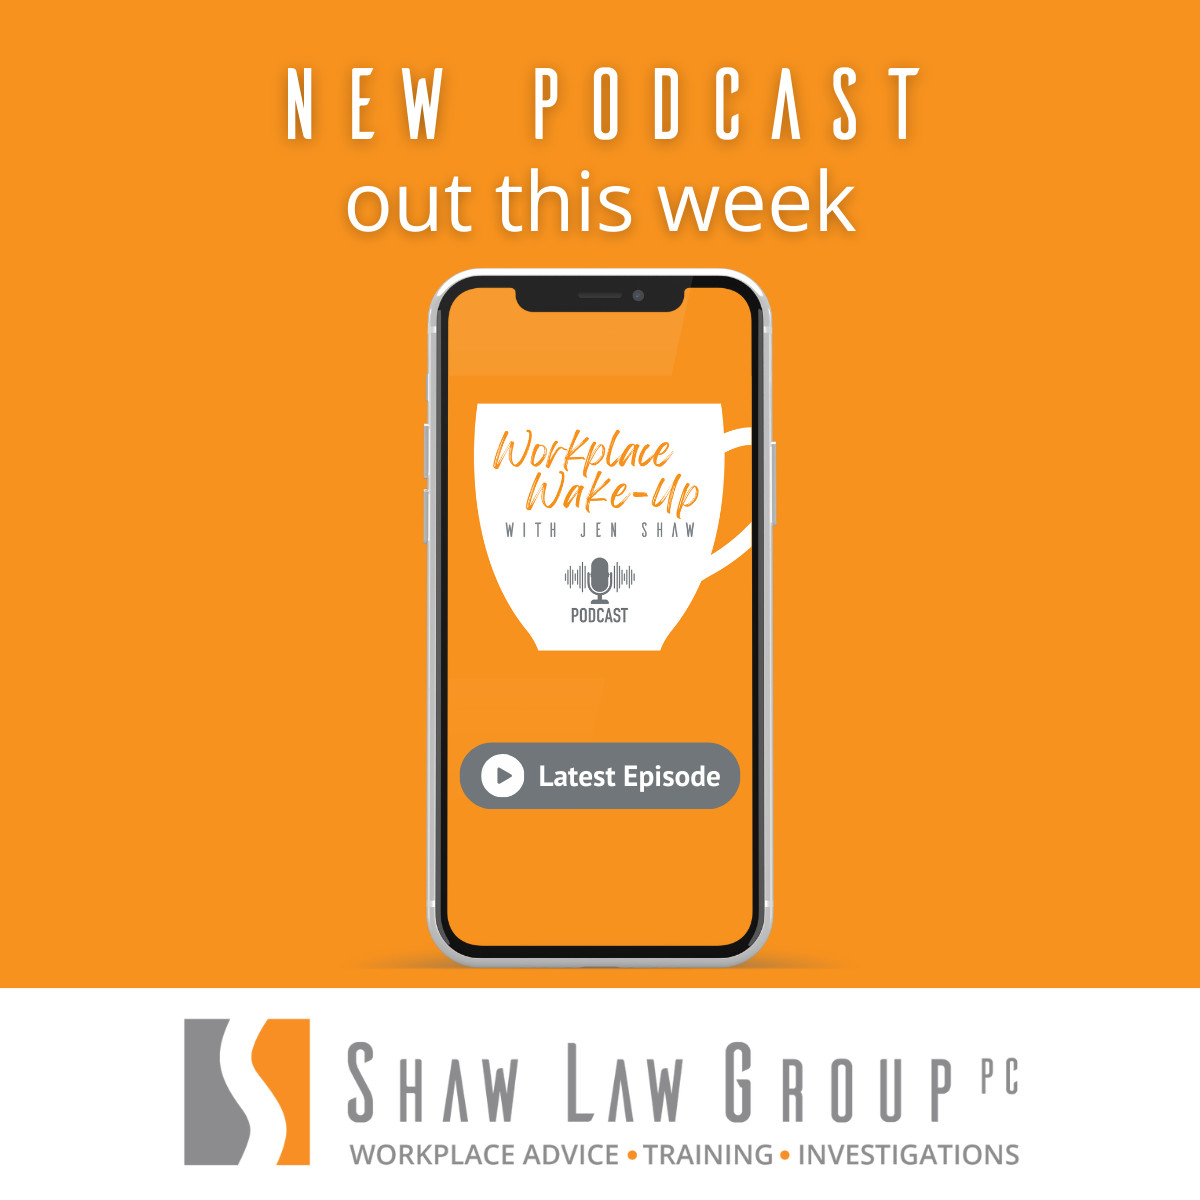 🎙️ Episode 123: In this episode, Jen reminds employers of the importance of saying 'no.'
Listen now: shawlawgroup.com/podcasts/

#EmployeeManagement #WorkplaceCulture #LeadershipTips #HRInsights #EmployeeRelations #JenTalksLaw, #workplacewakeup